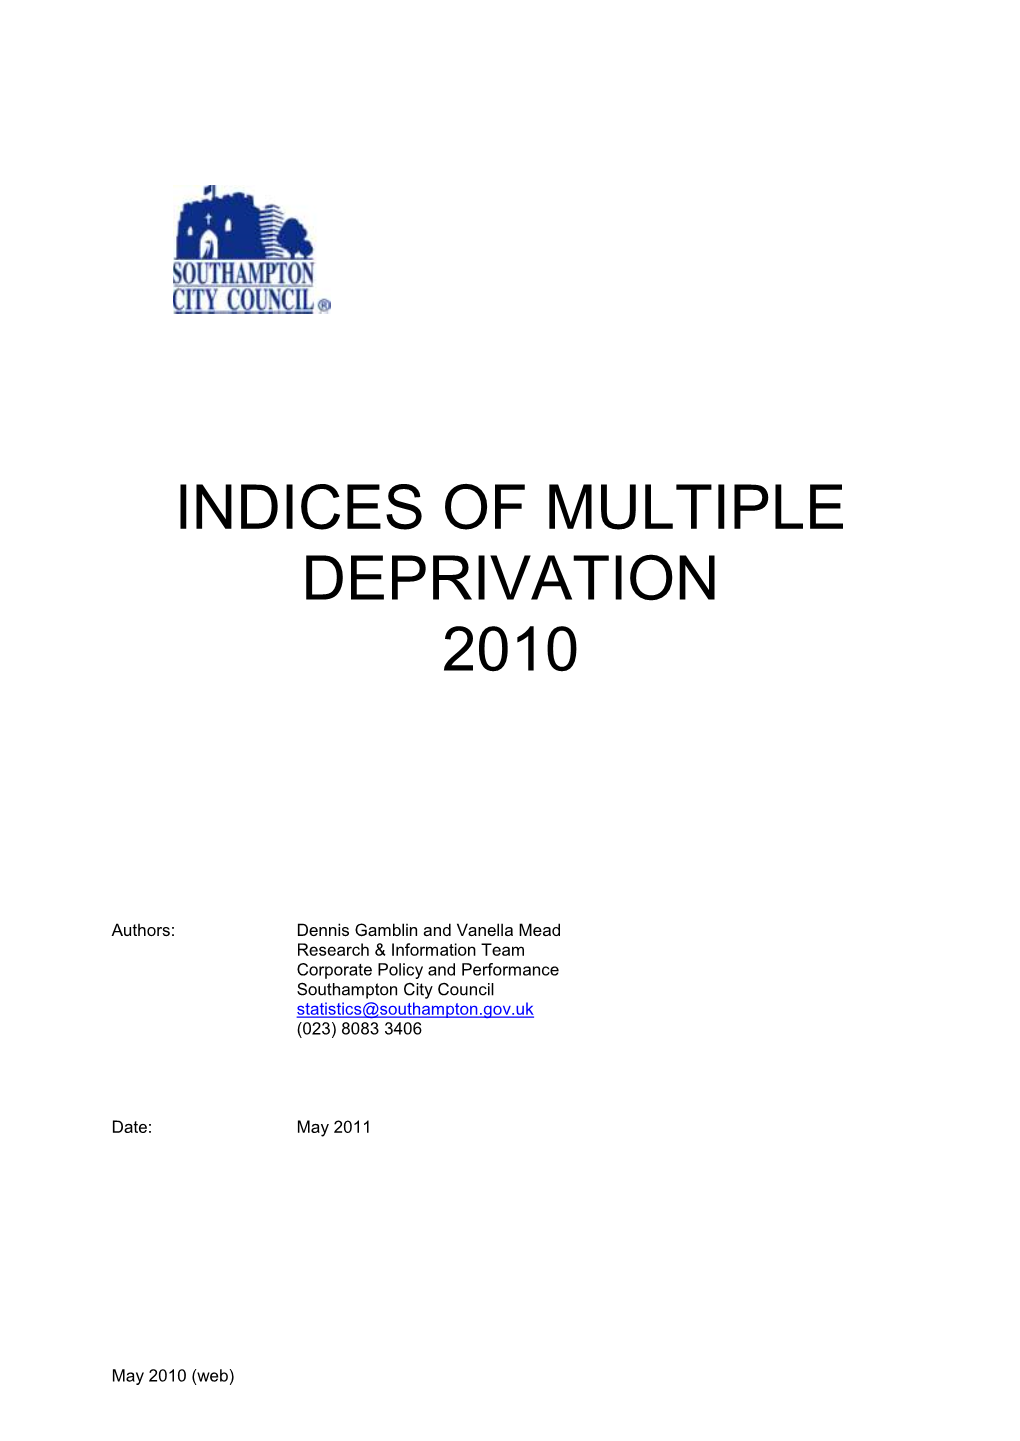 Indices of Multiple Deprivation 2010